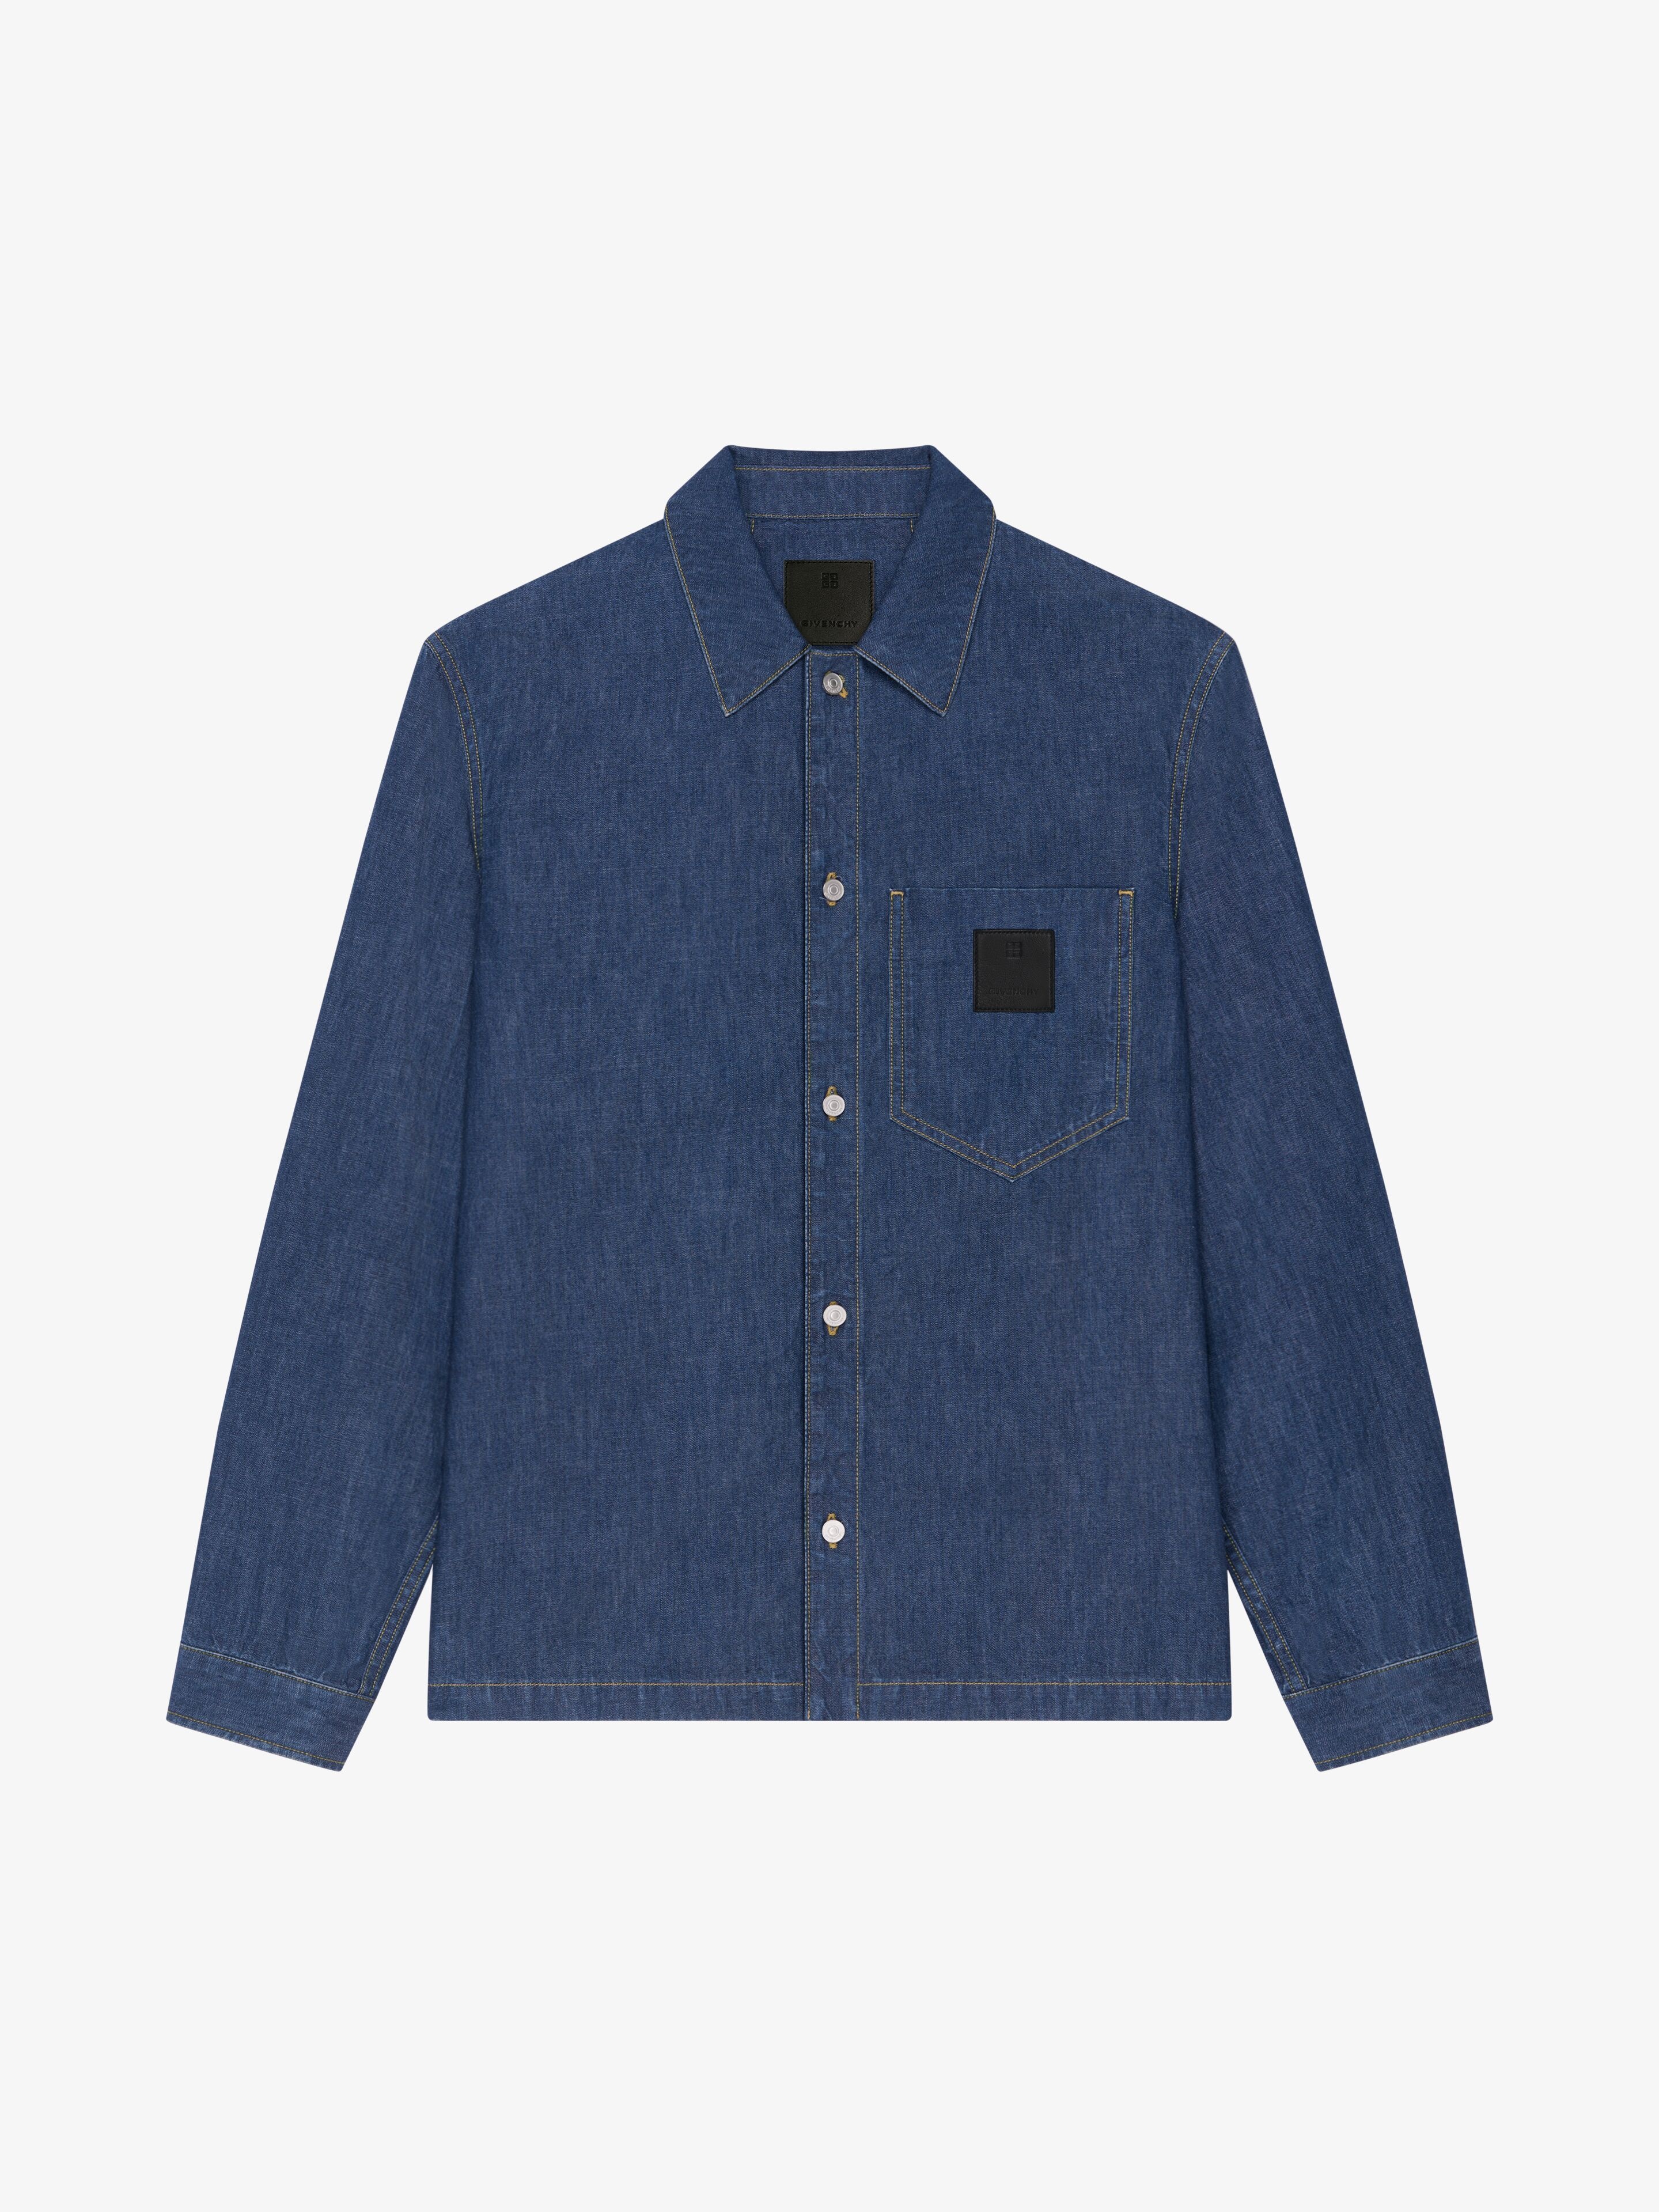 BOXY FIT SHIRT IN DENIM - 1